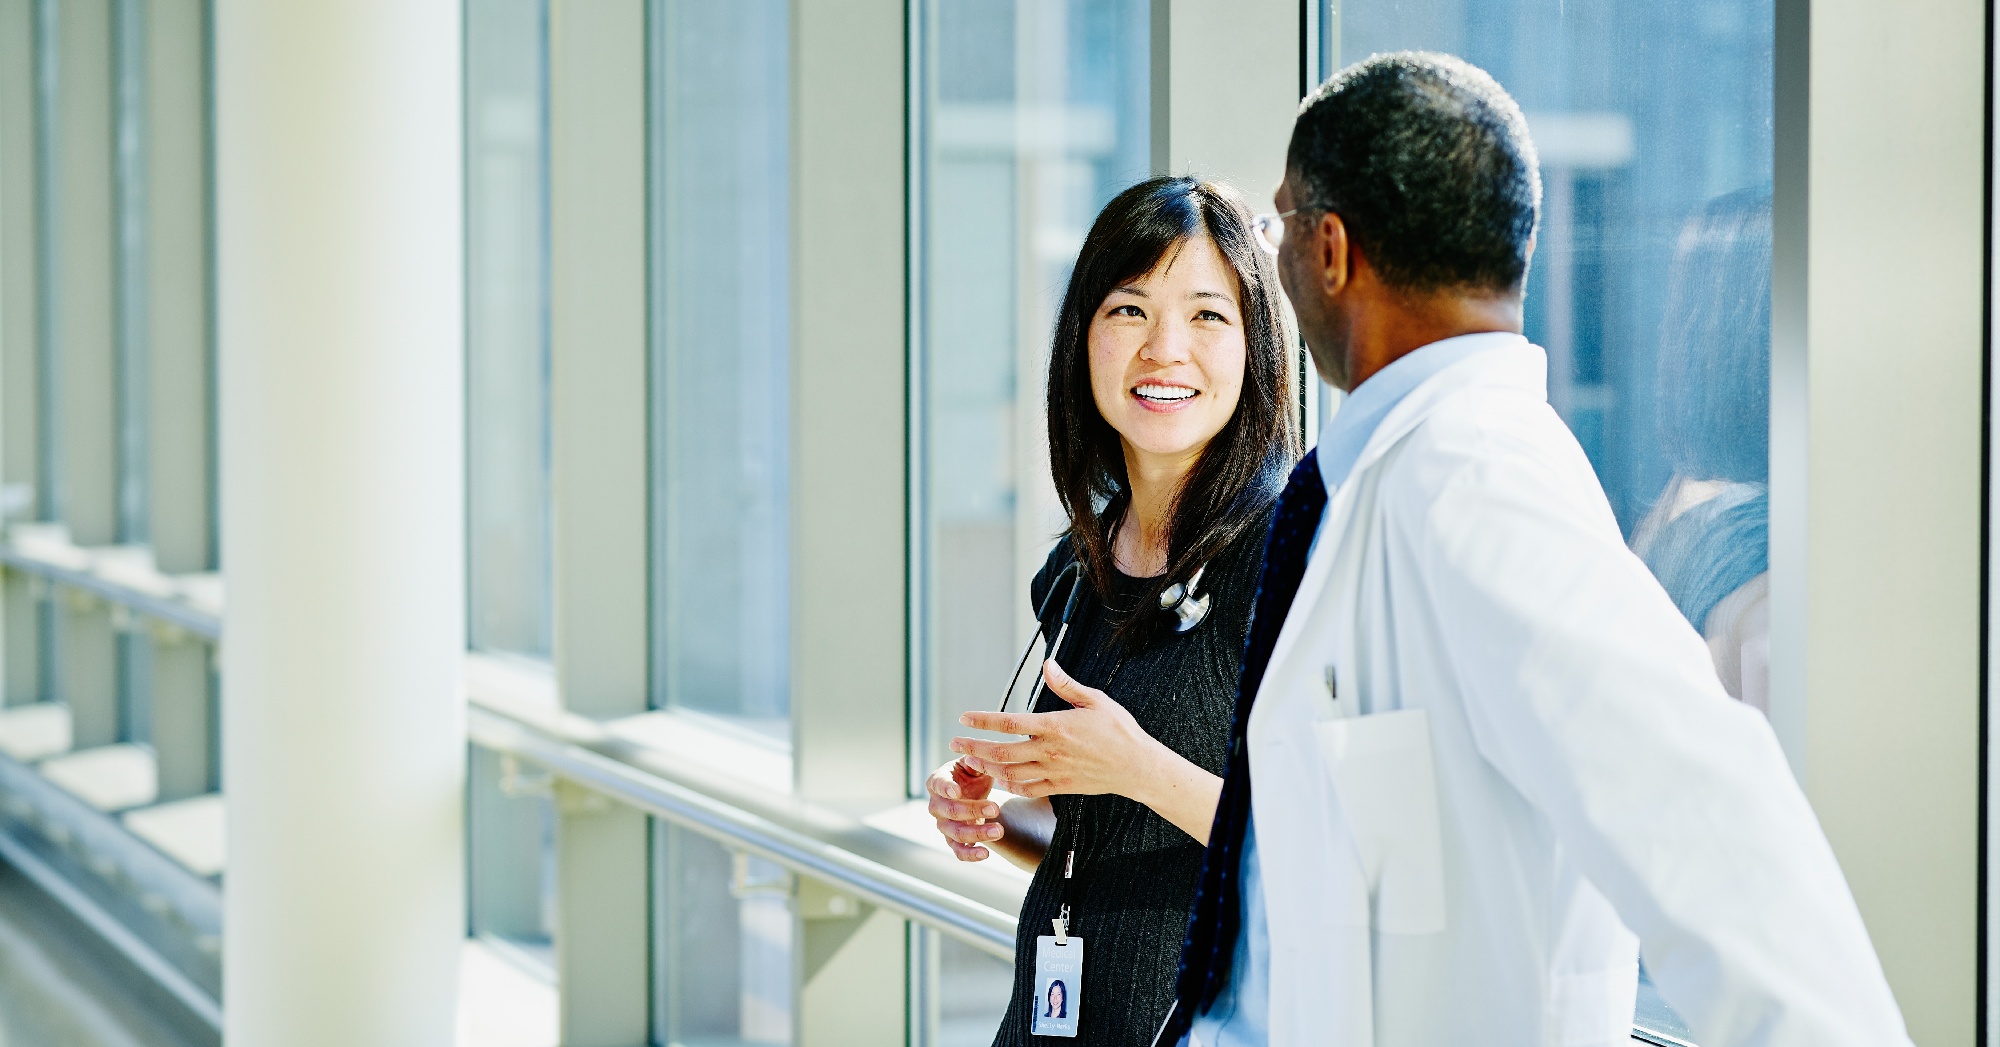 Physician liaison talks to physician in hallway